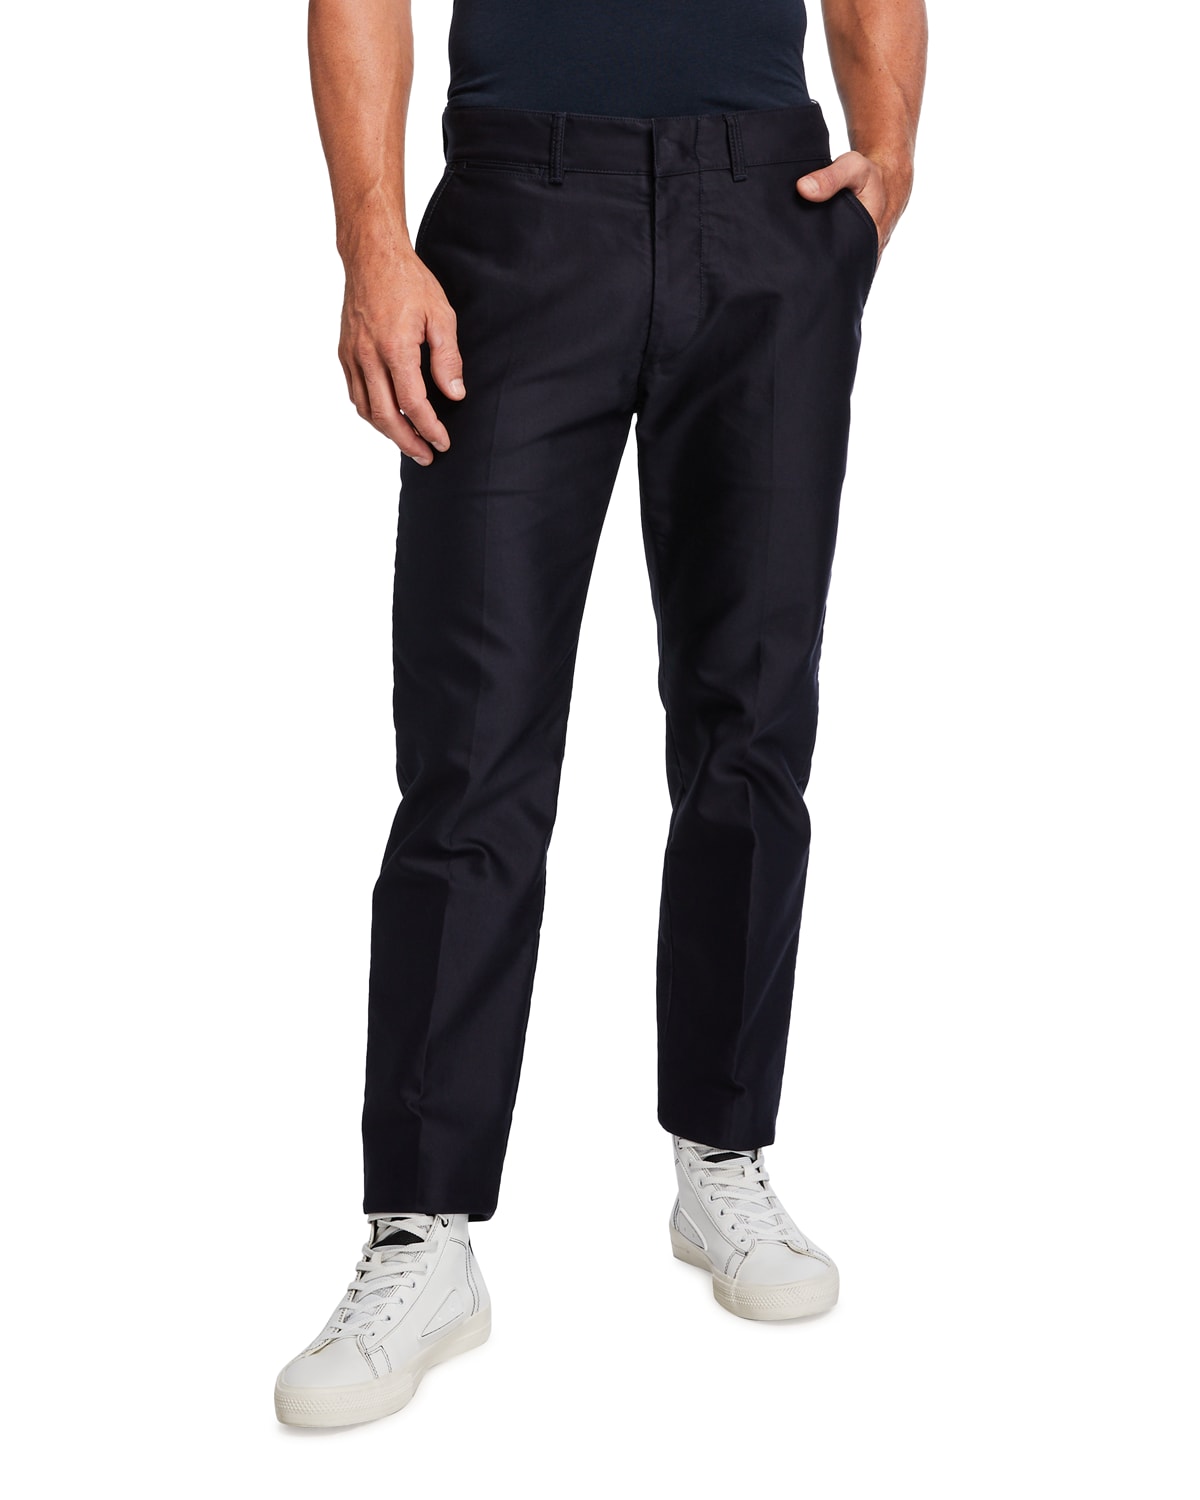 PRPS Men's Ripped Stitched Chino Pants | Neiman Marcus